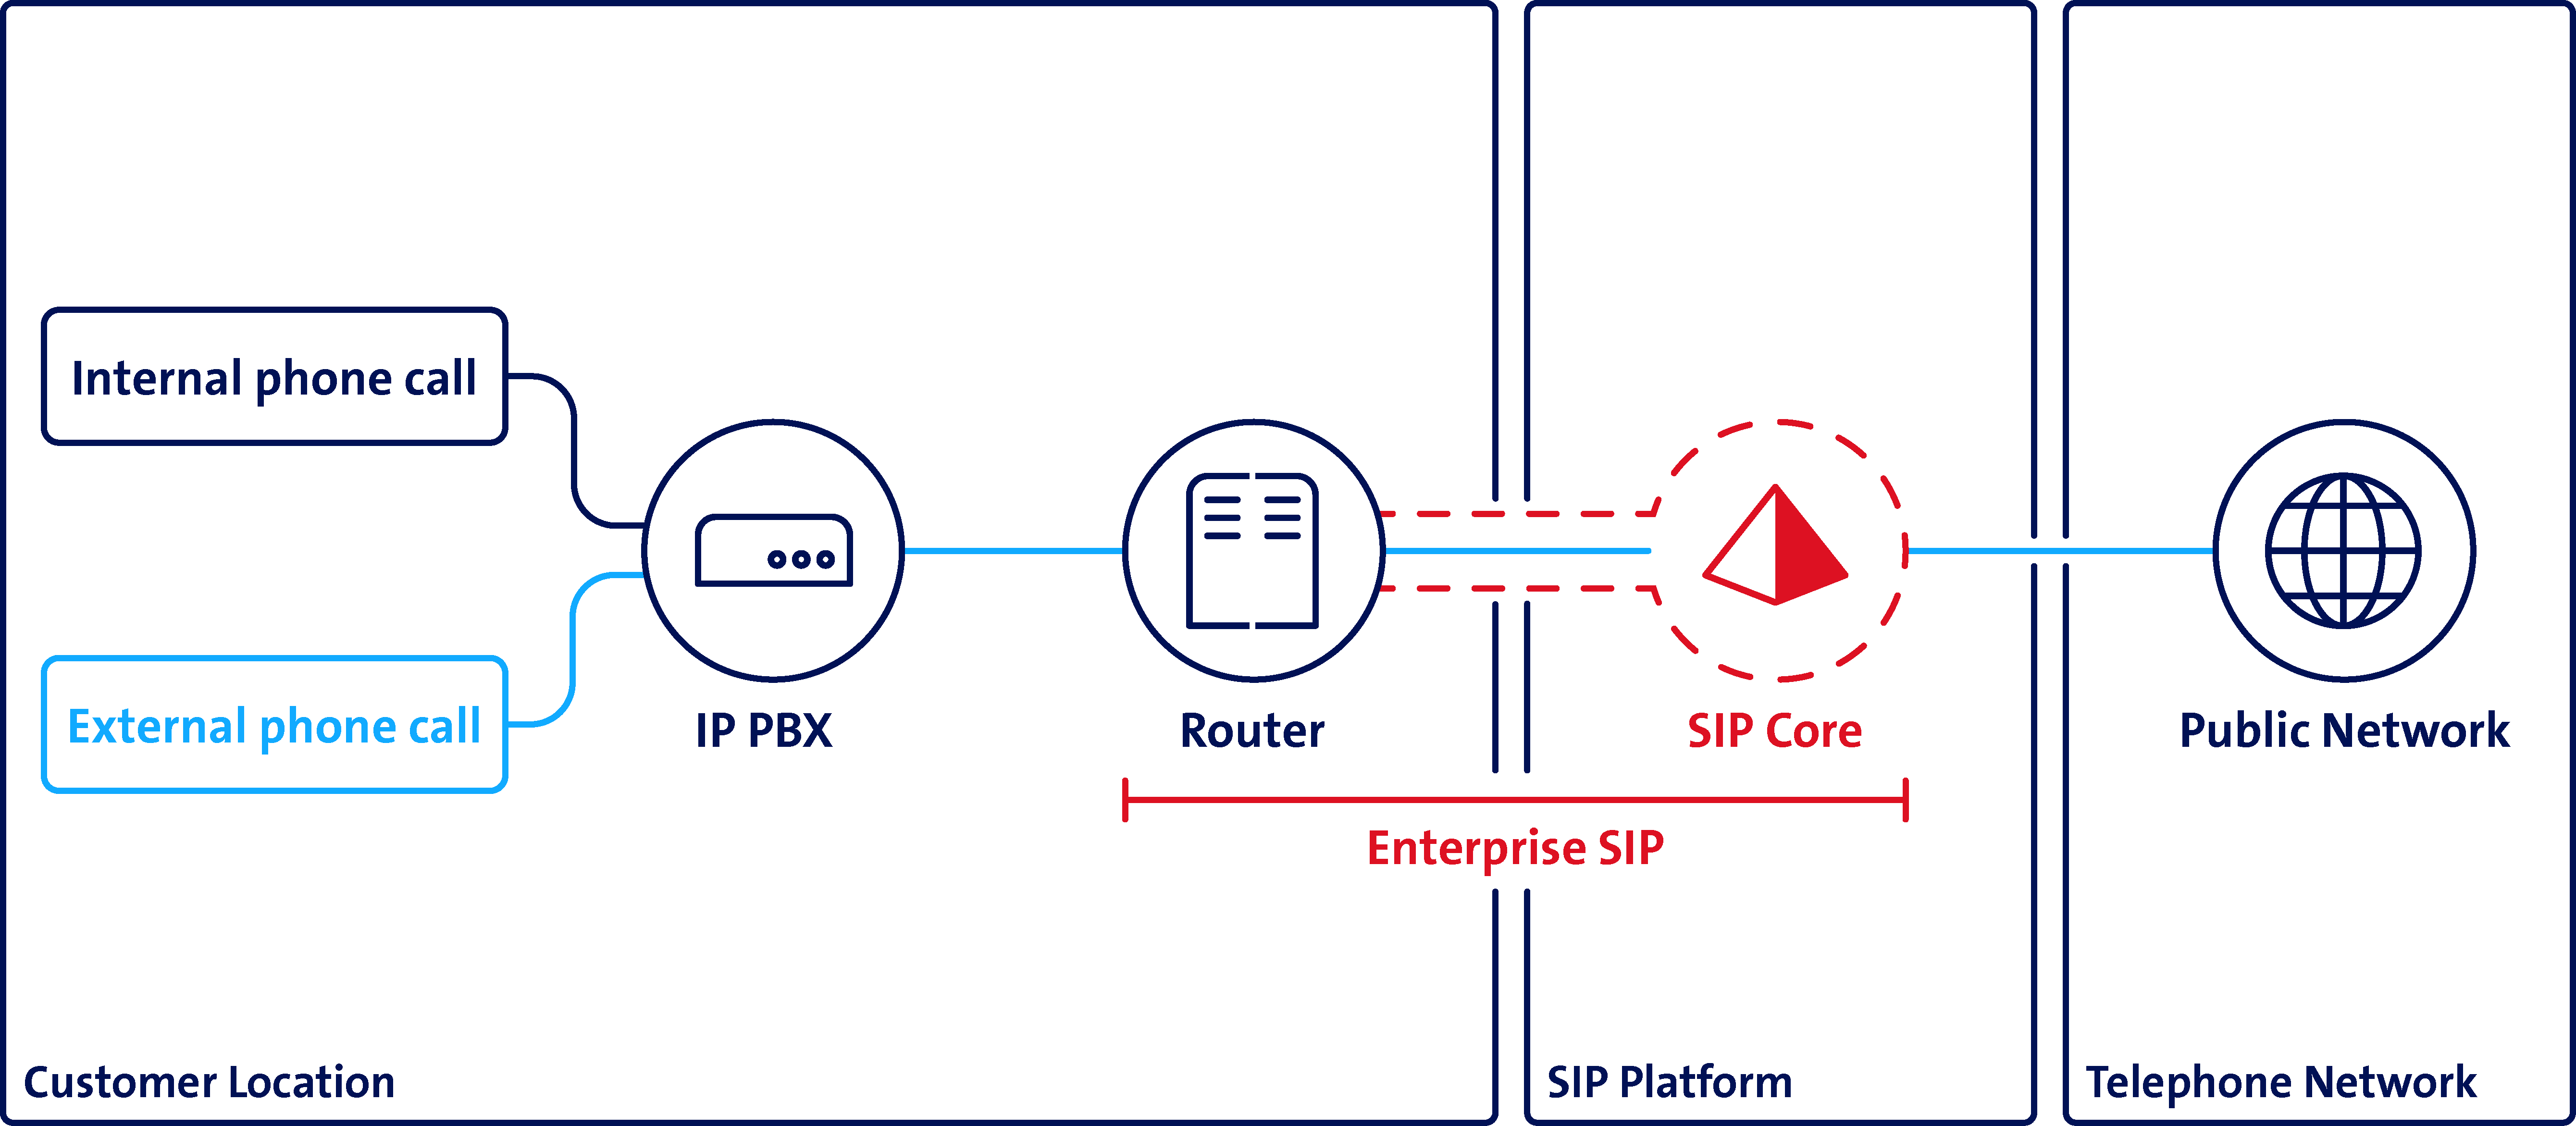 Enterprise SIP: connects your on-premise private branch exchange to the Public Switched Telephone Network. 